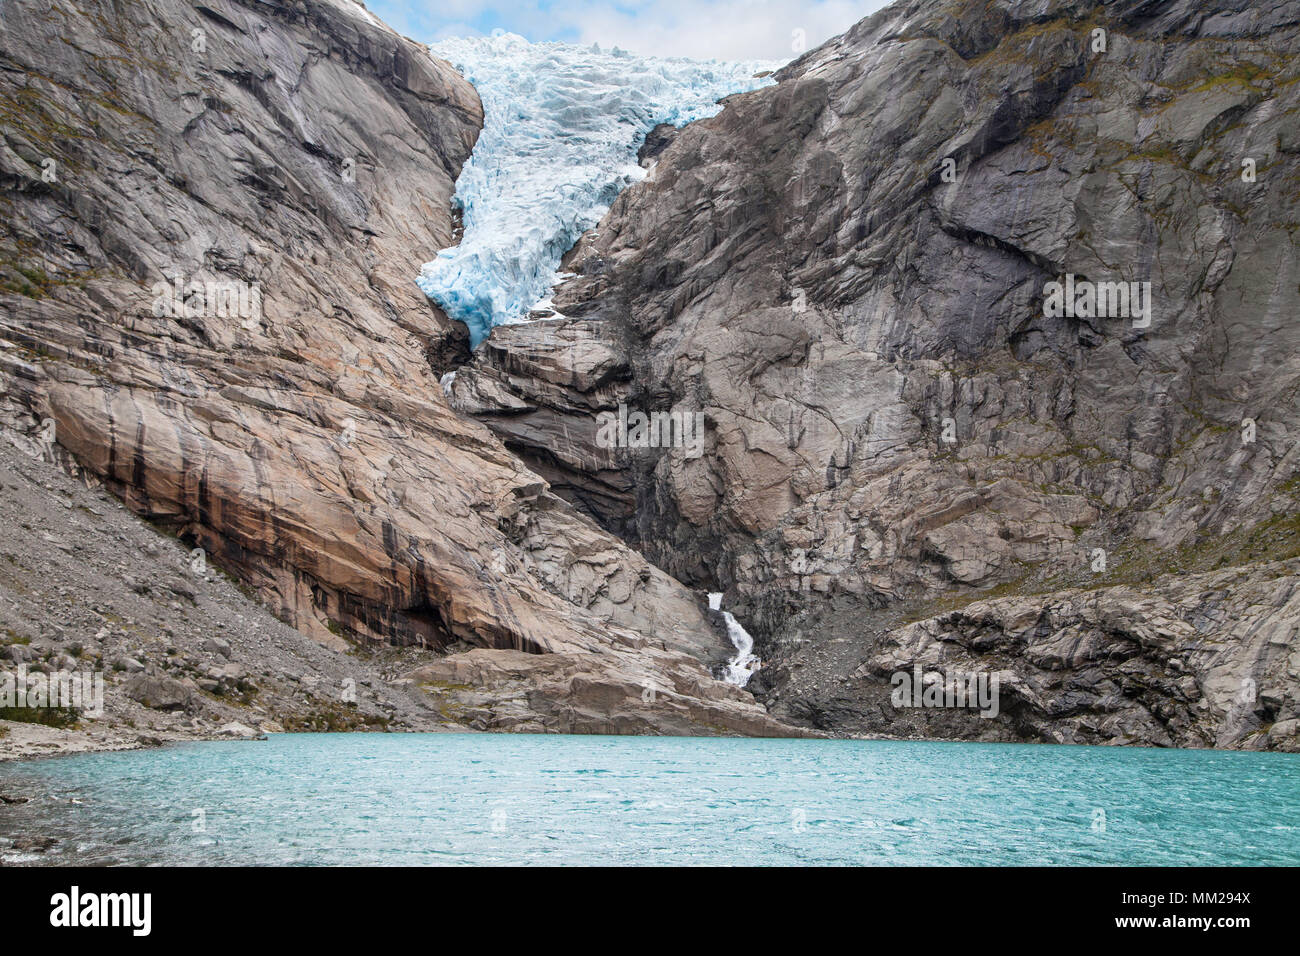 Briksdalsbreen Glacier and its lagoon in 2017, Jostedalsbreen National Park, Sogn og Fjordane, Norway. Stock Photo